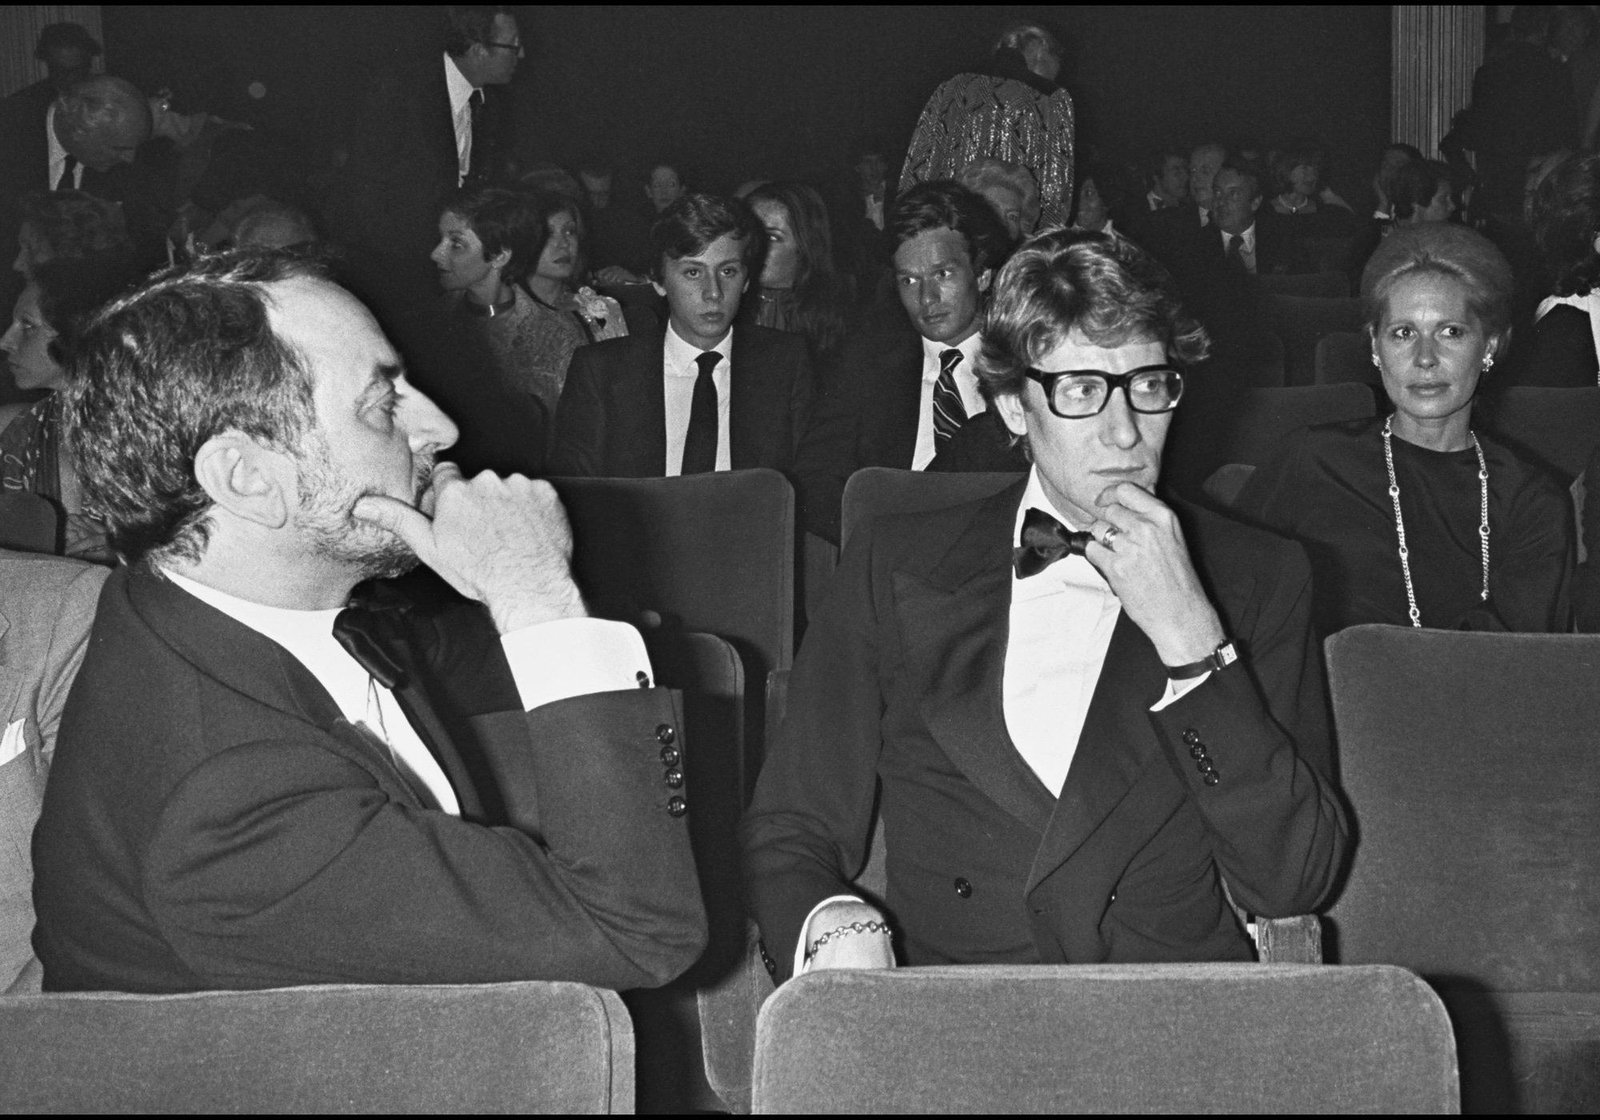 The colorful love story of Yves Saint Laurent and Pierre Bergé